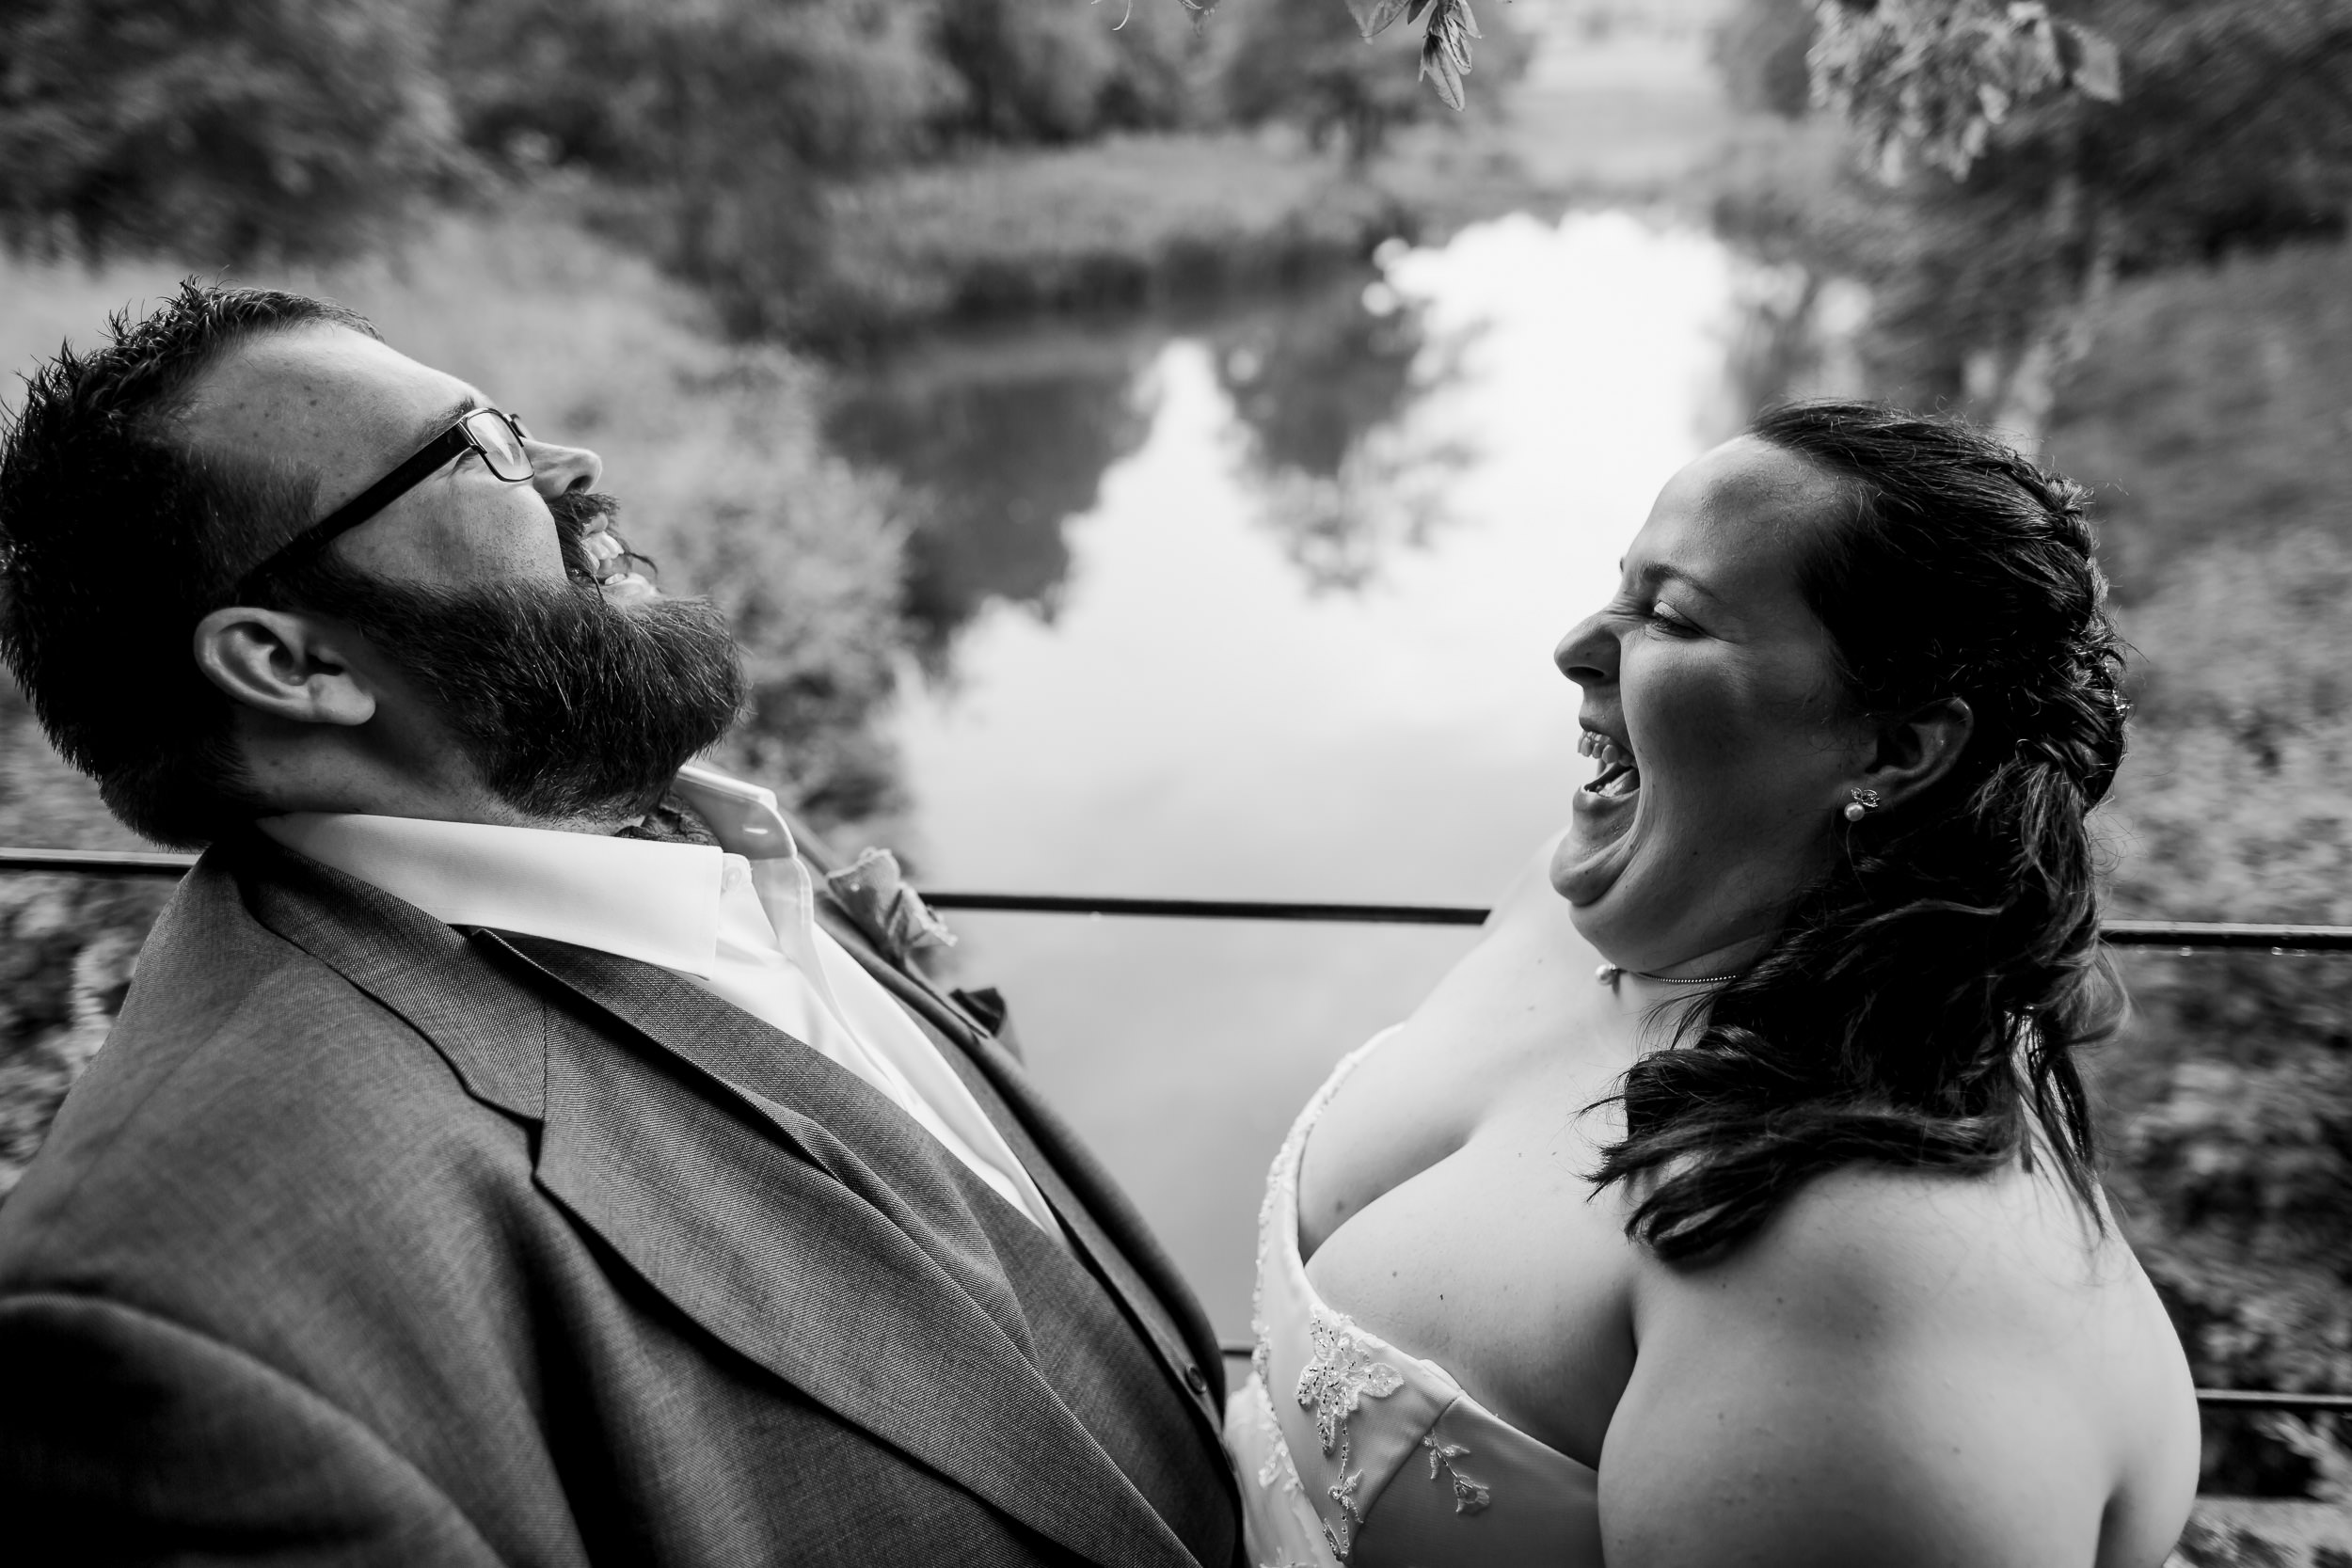 Bride and groom laughing on their wedding day - weddings at YSP - Yorkshire Sculpture Park weddings